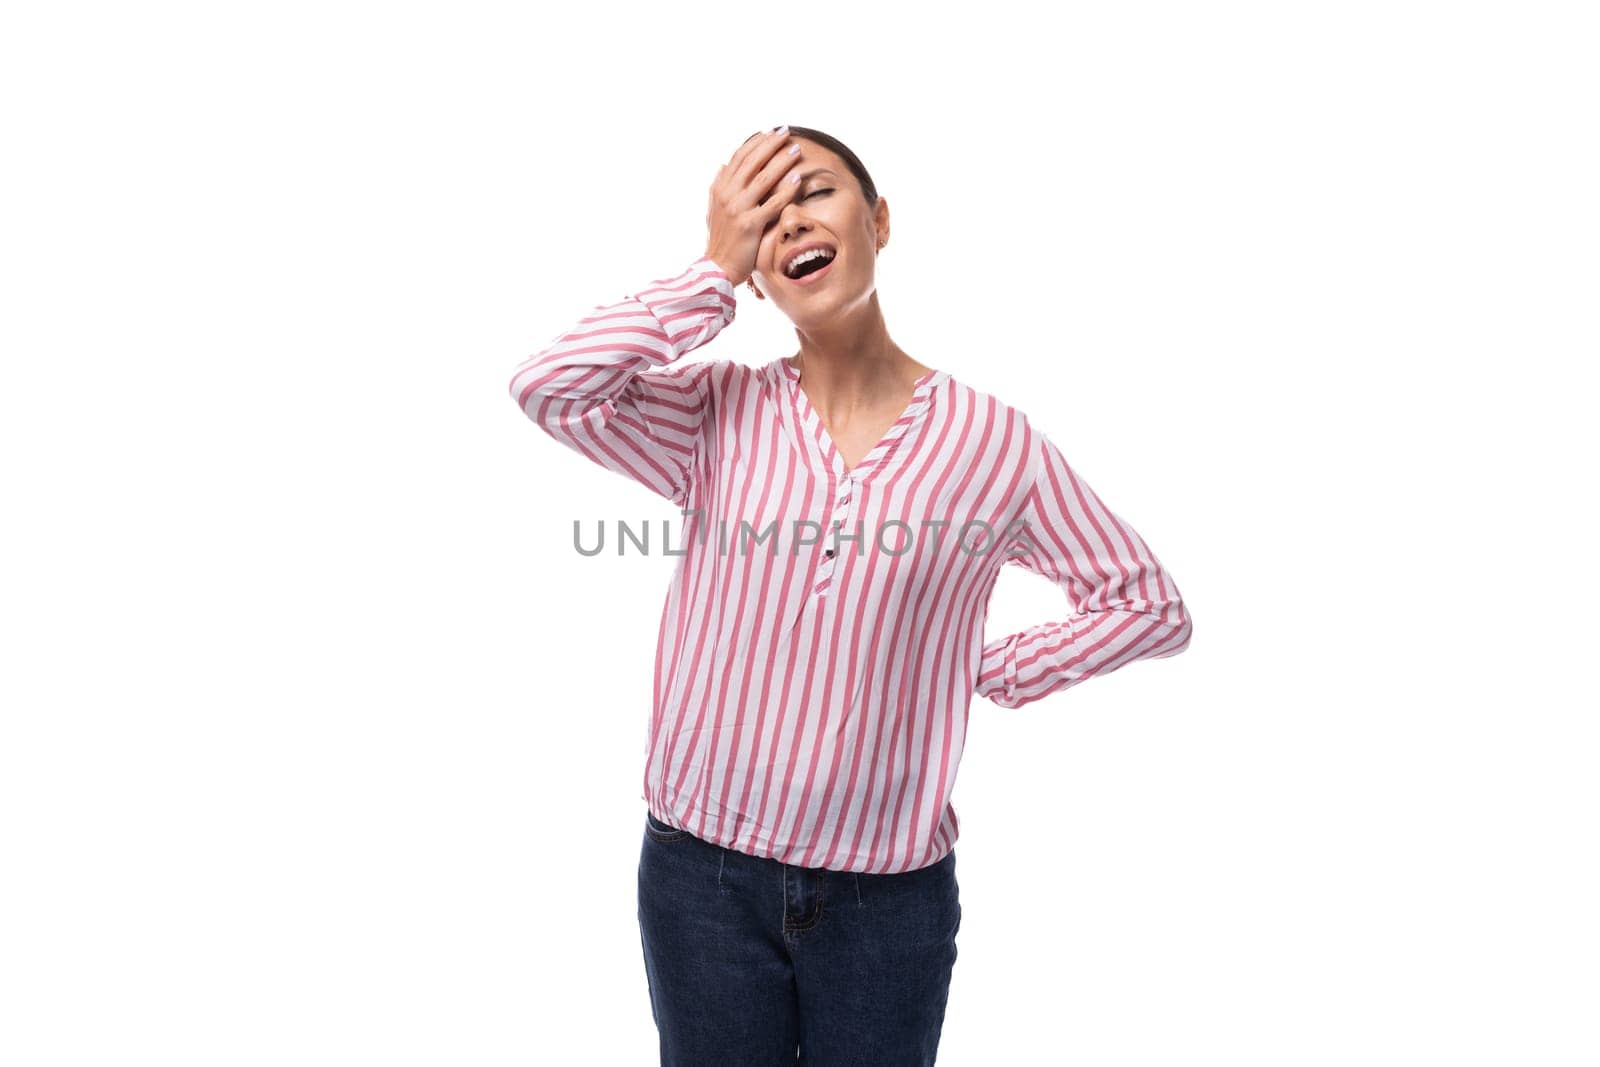 young european woman with black hair pulled back in a ponytail wearing a striped blouse and jeans on a white background.